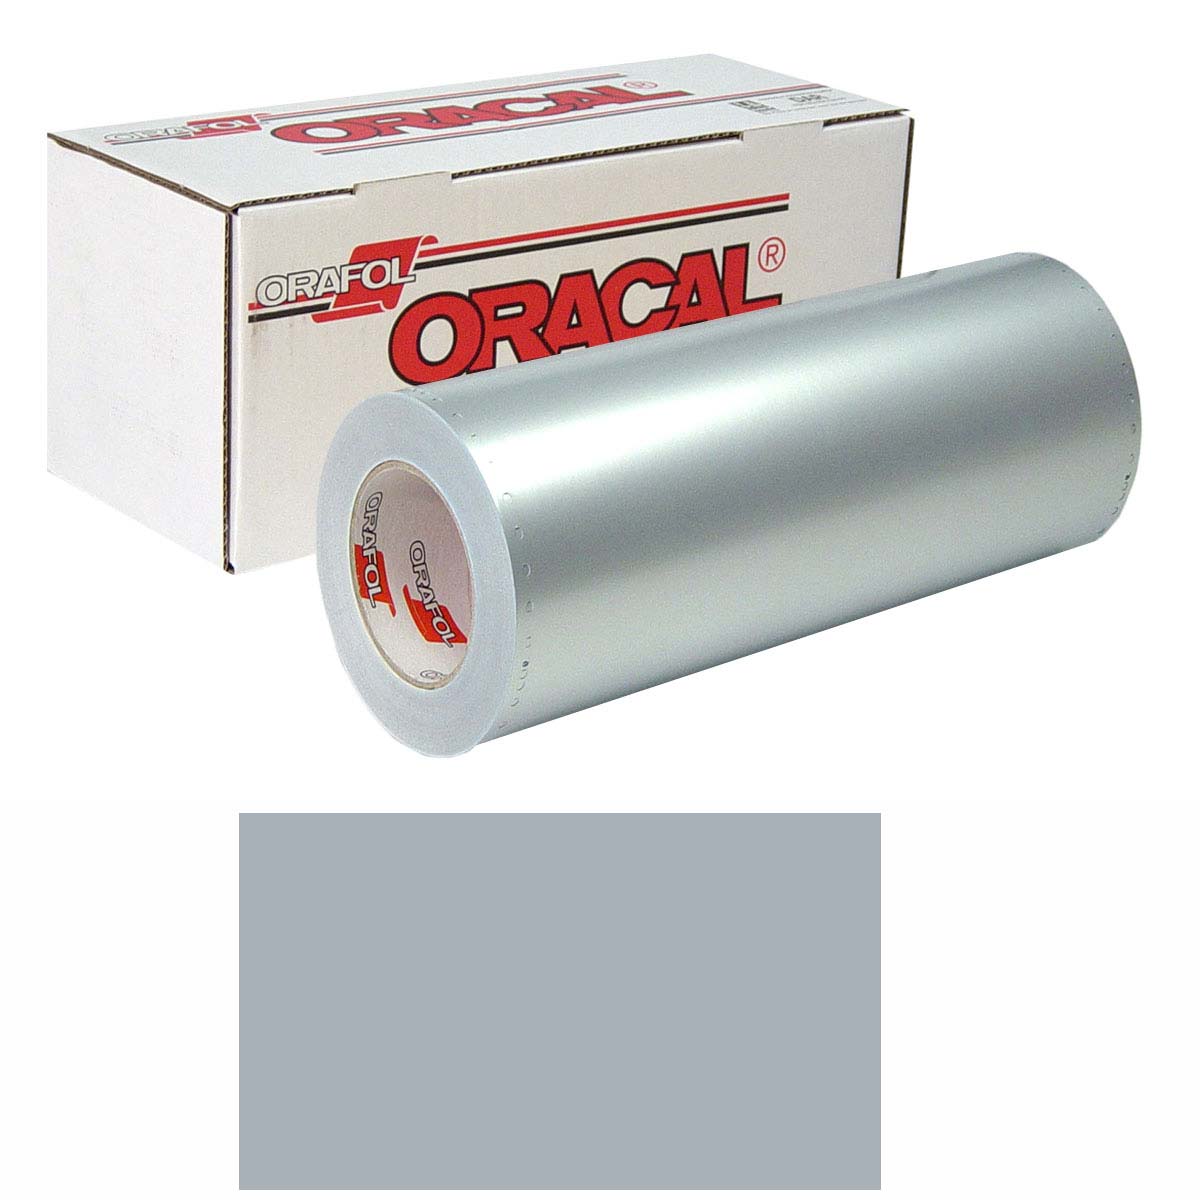 ORACAL 351 Polyester 30in X 10yd 001 Chrome